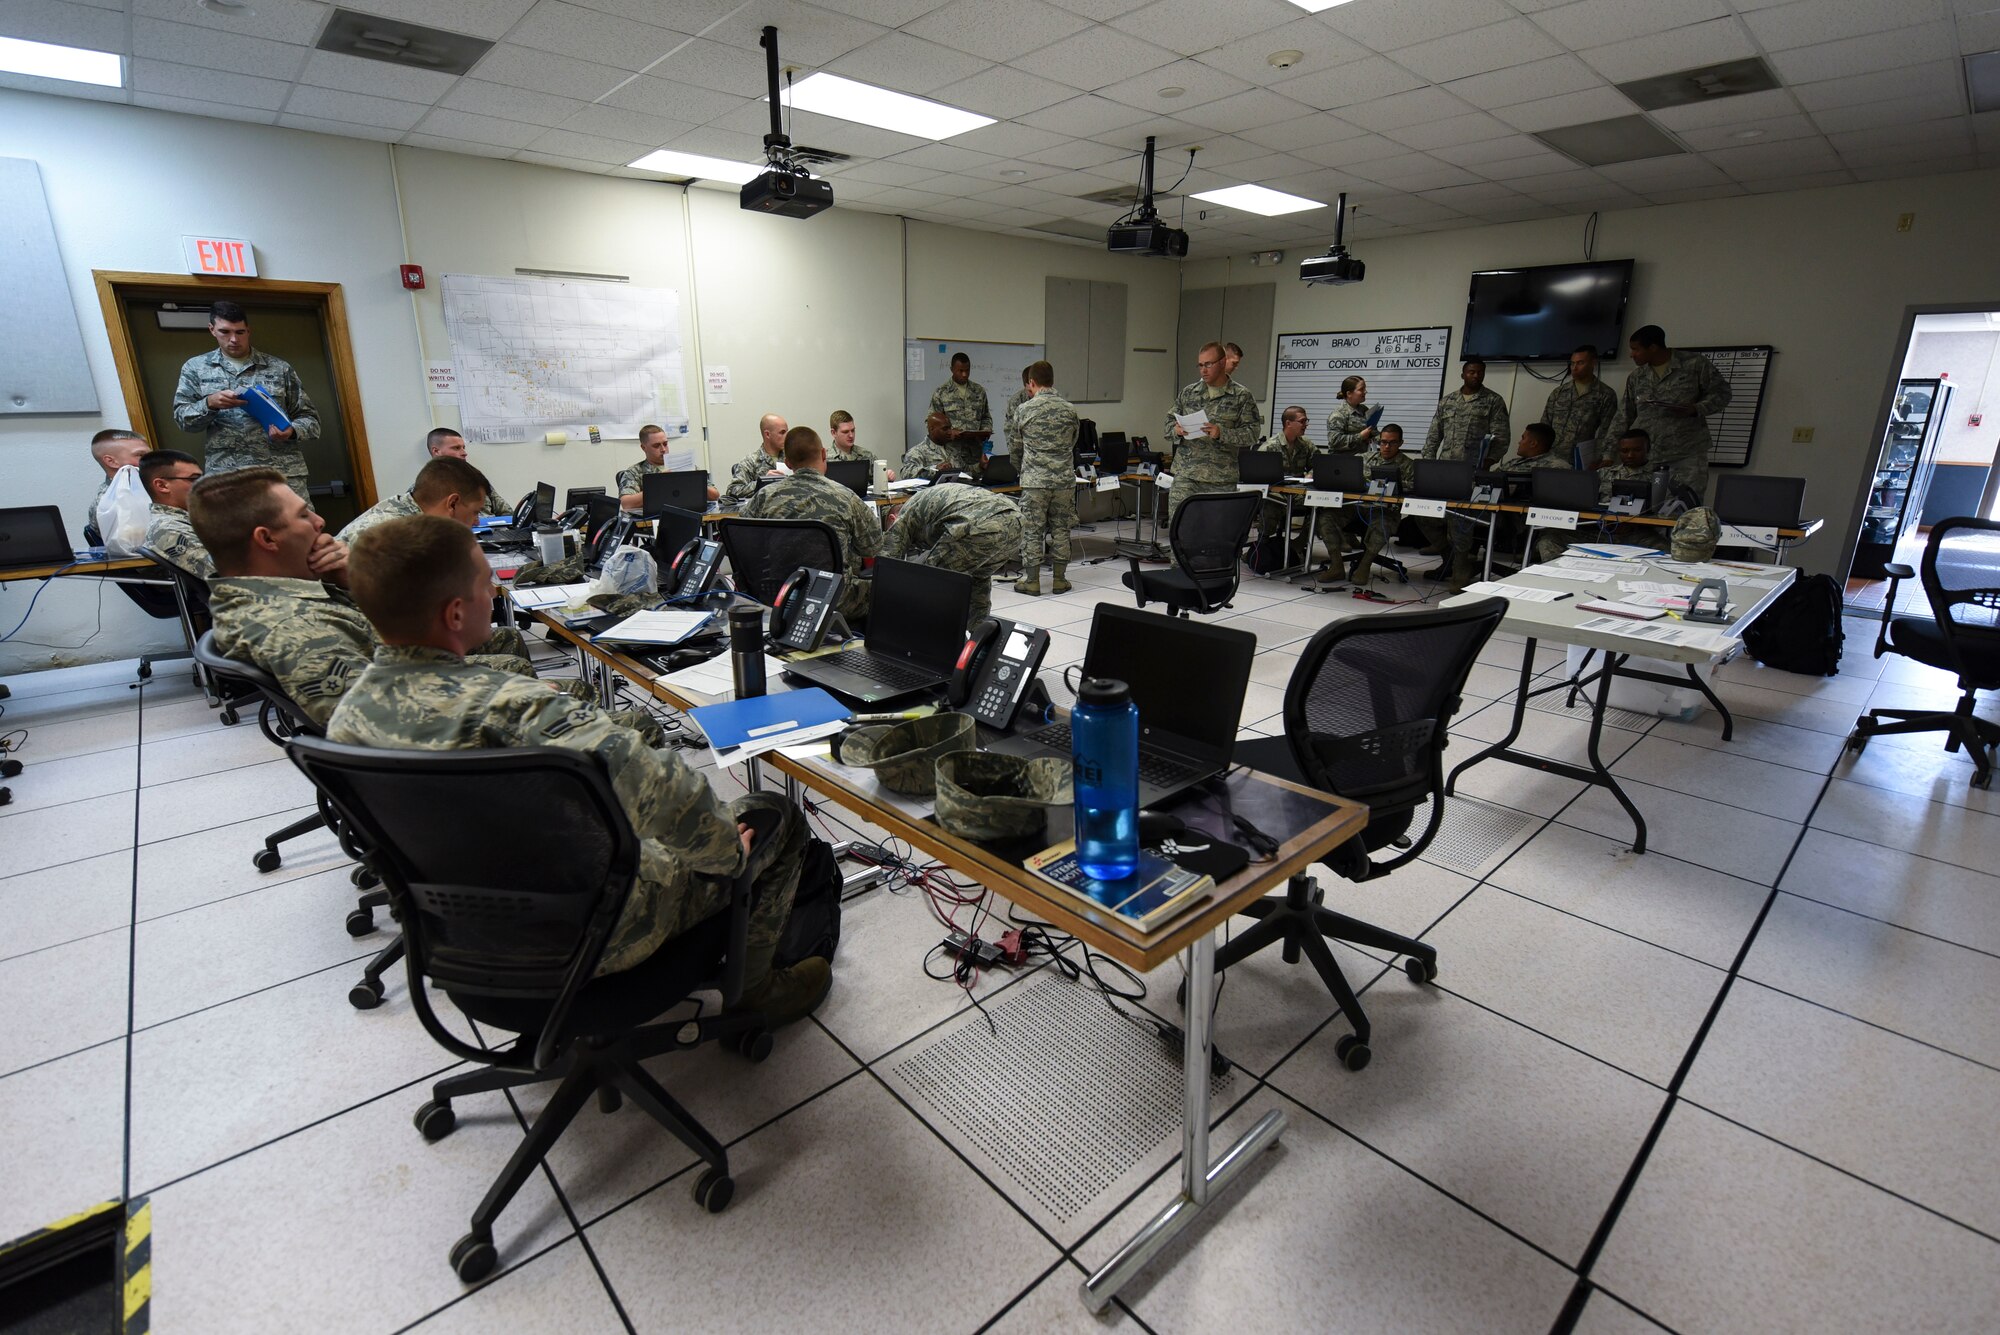 Airmen prepare for a readiness exercise on June 14, 2018, on Grand Forks Air Force Base, North Dakota. Readiness exercises ensure Airmen are prepared to deploy when called upon and provide an opportunity to hone the skills needed to quickly process Airmen. (U.S. Air Force photo by Airman 1st Class Melody Wolff)